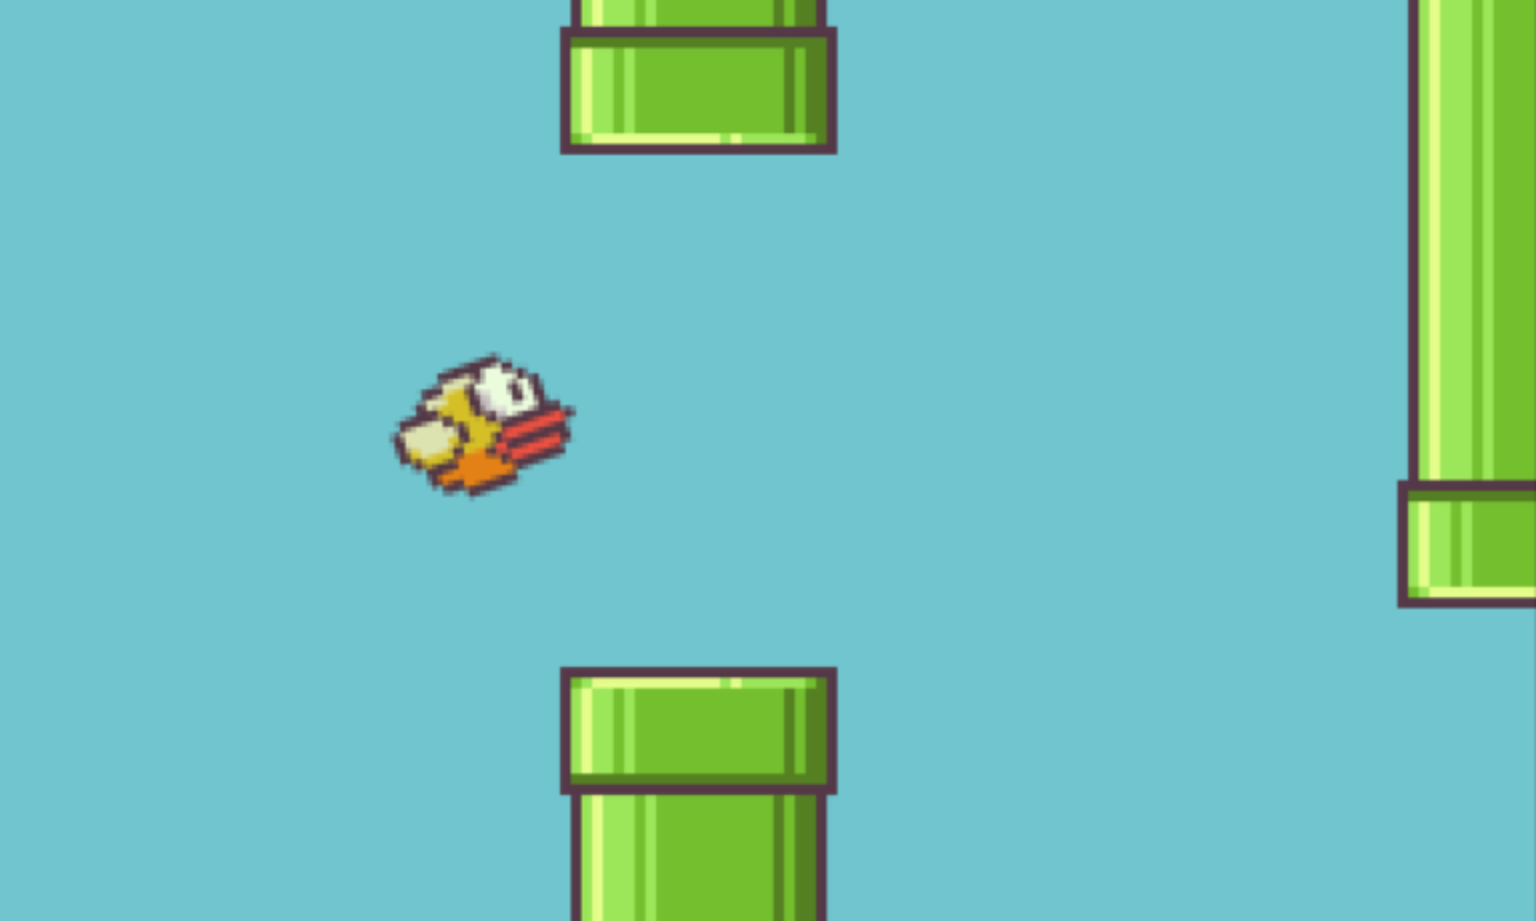 Game over for Flappy Bird